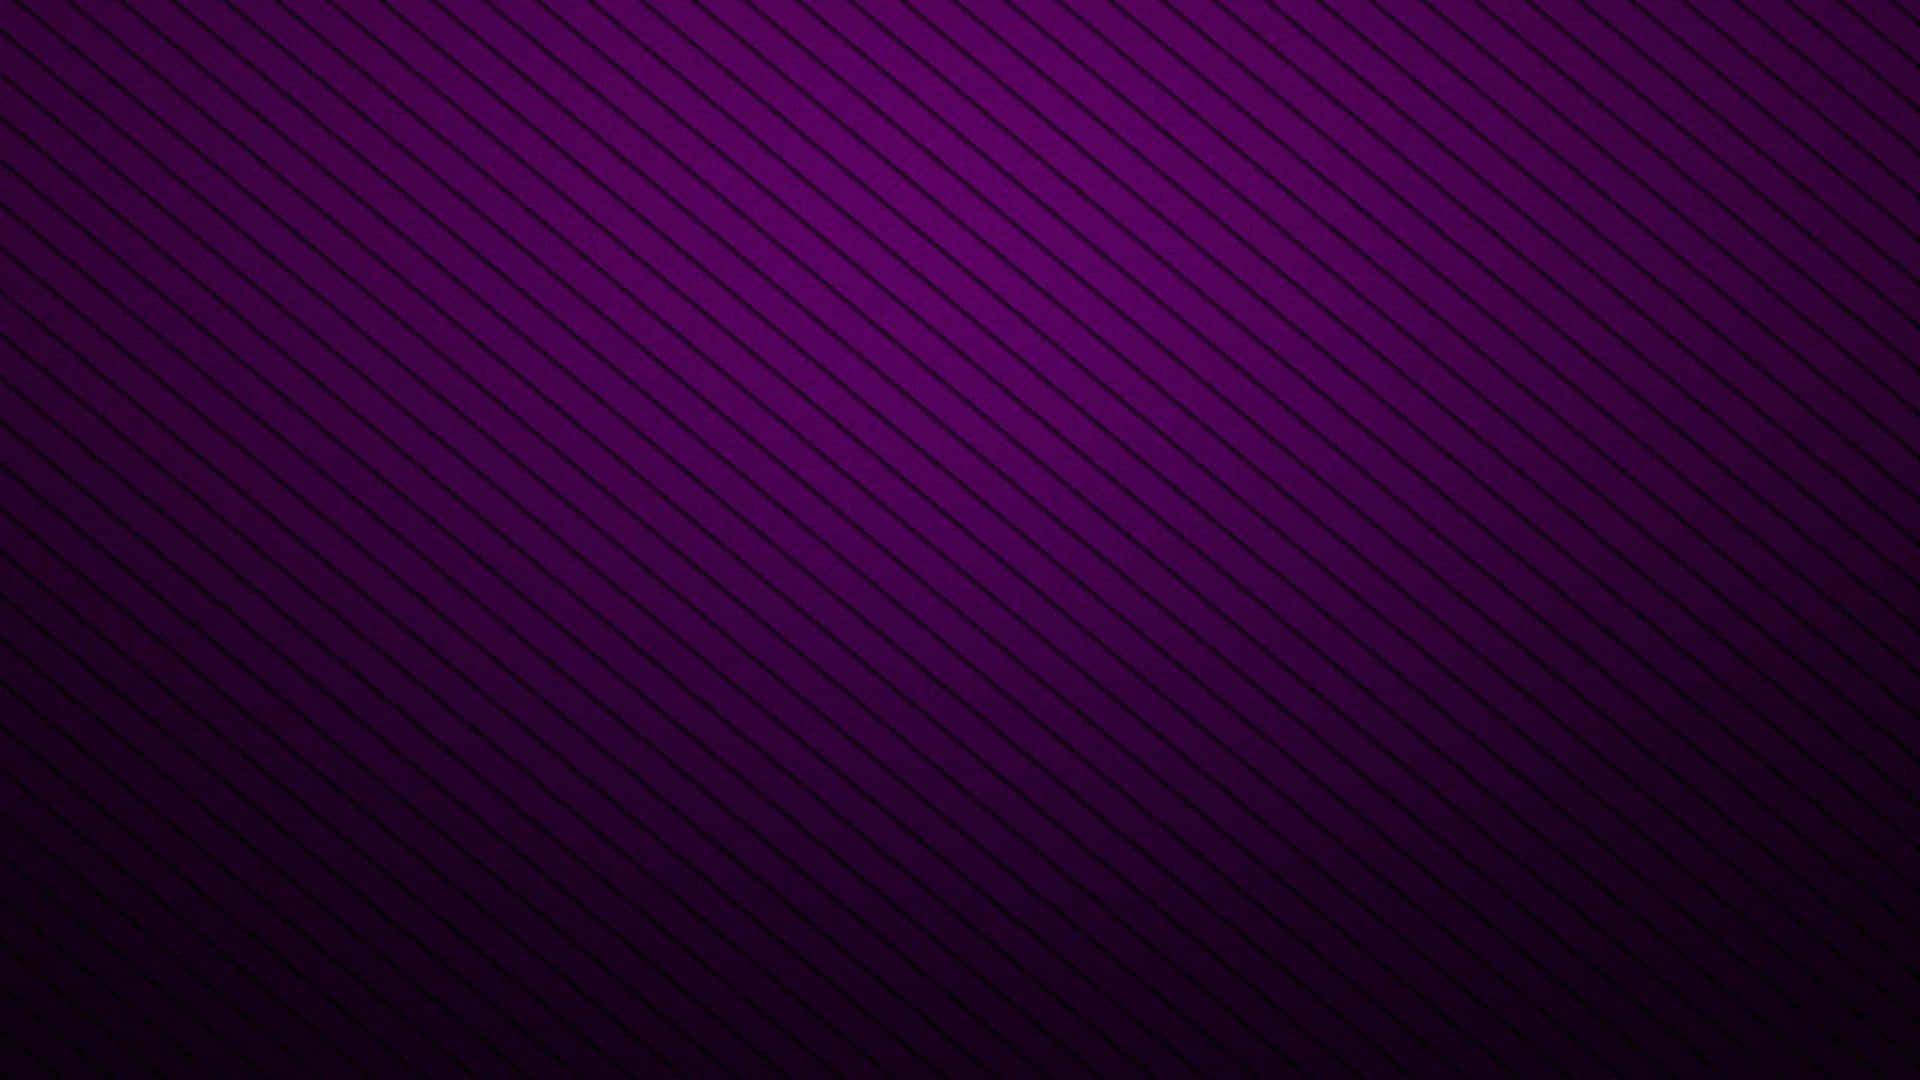 Colorful purple texture background